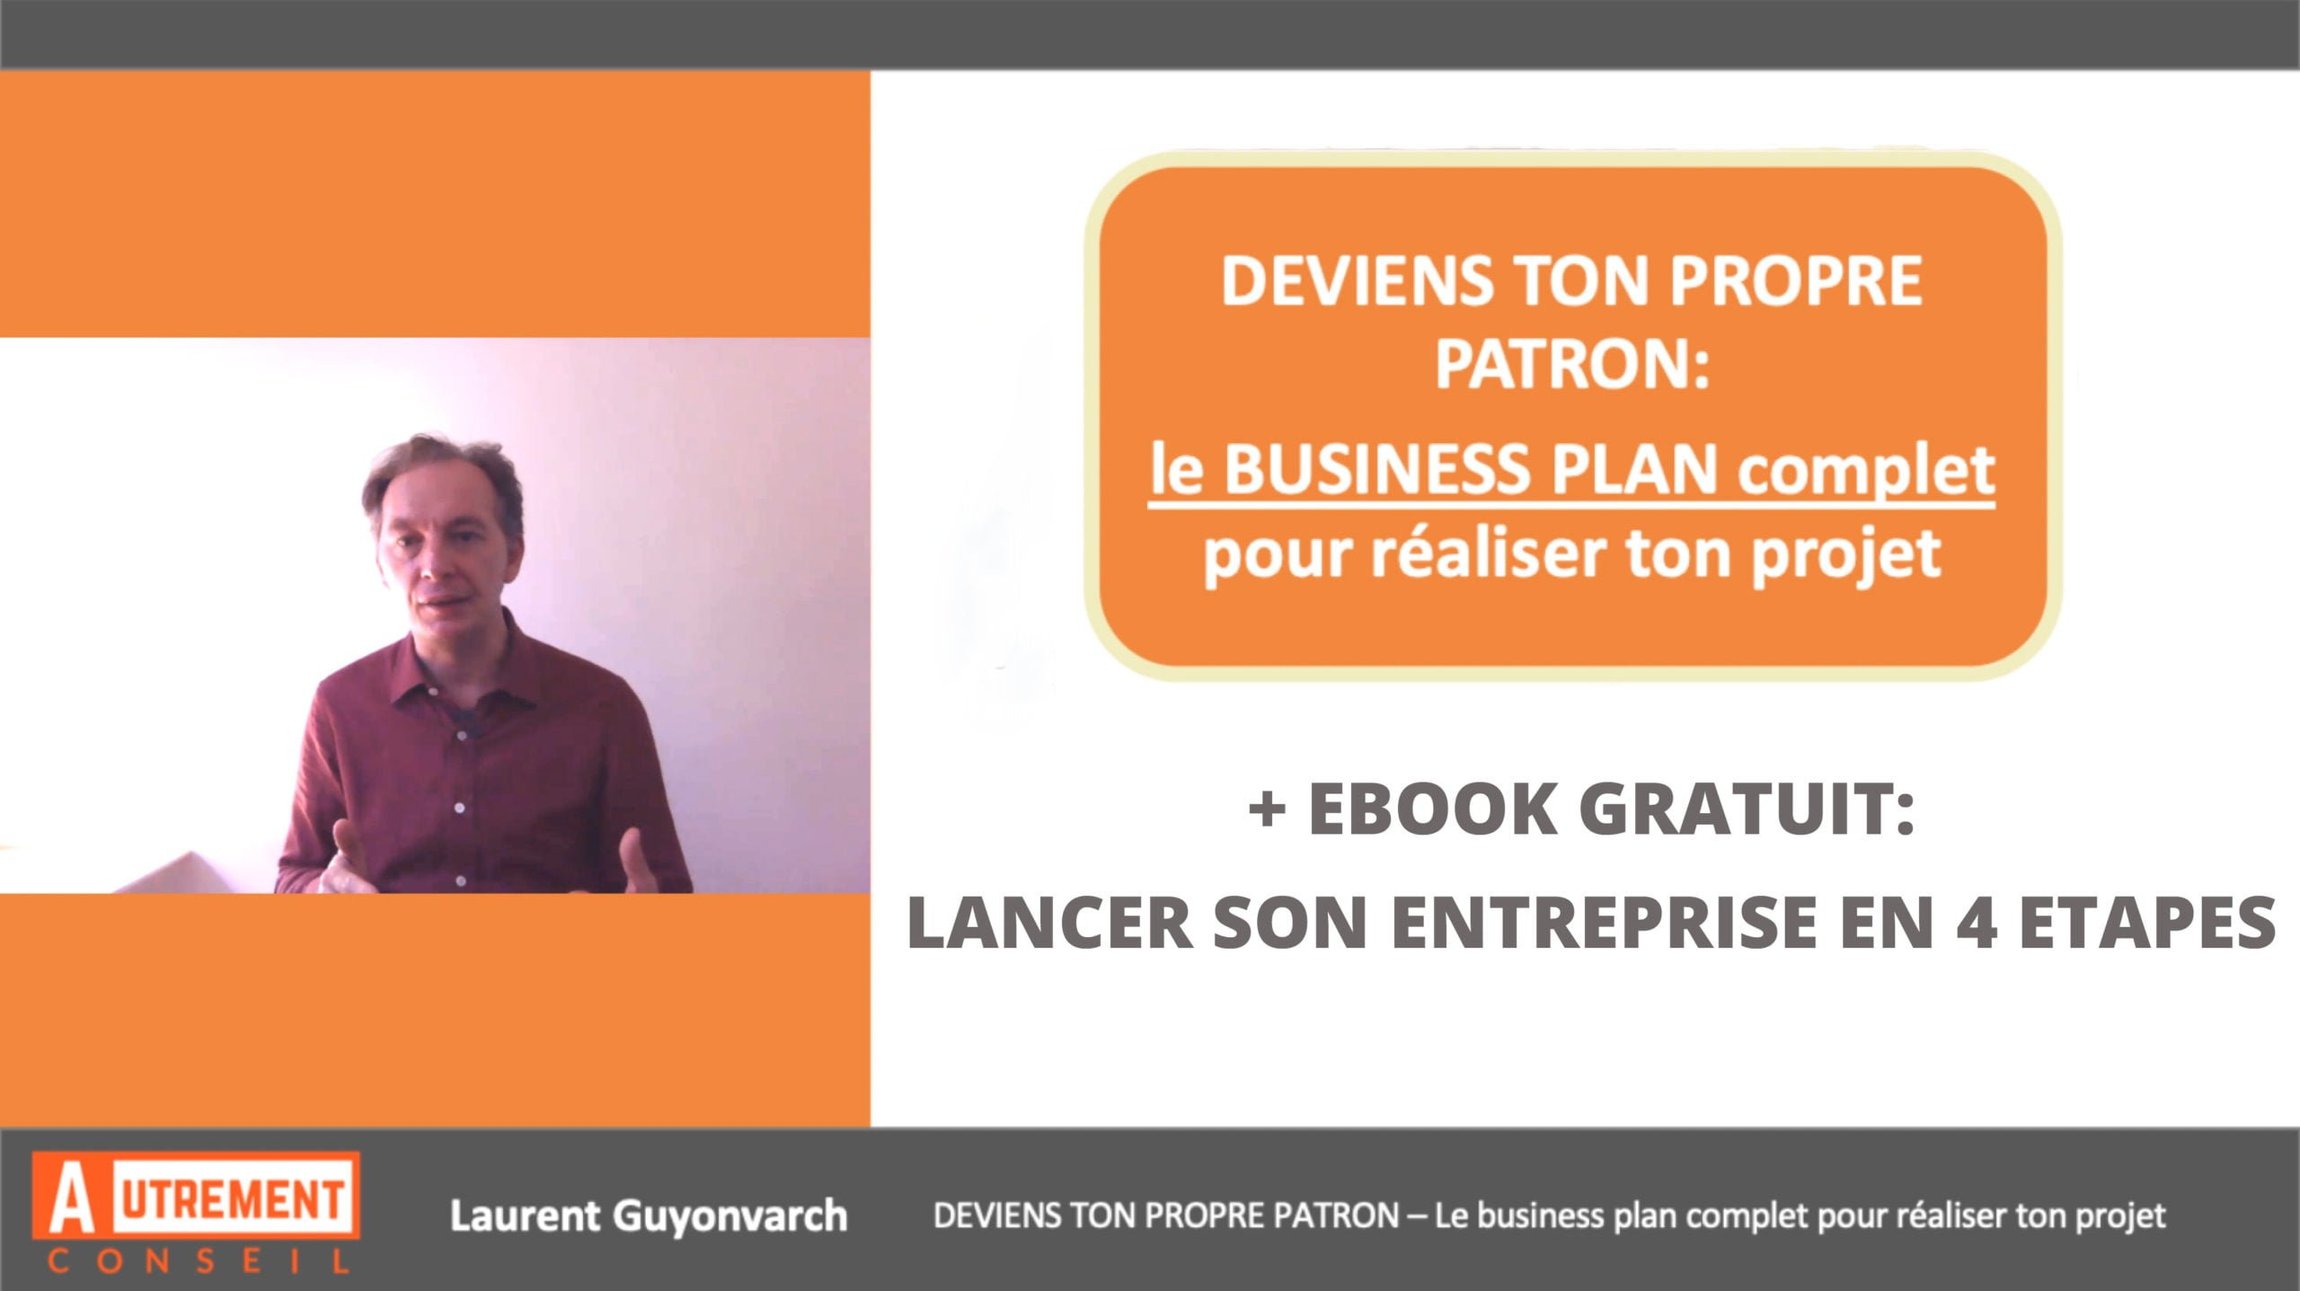 You are currently viewing Le business plan complet pour réaliser son projet